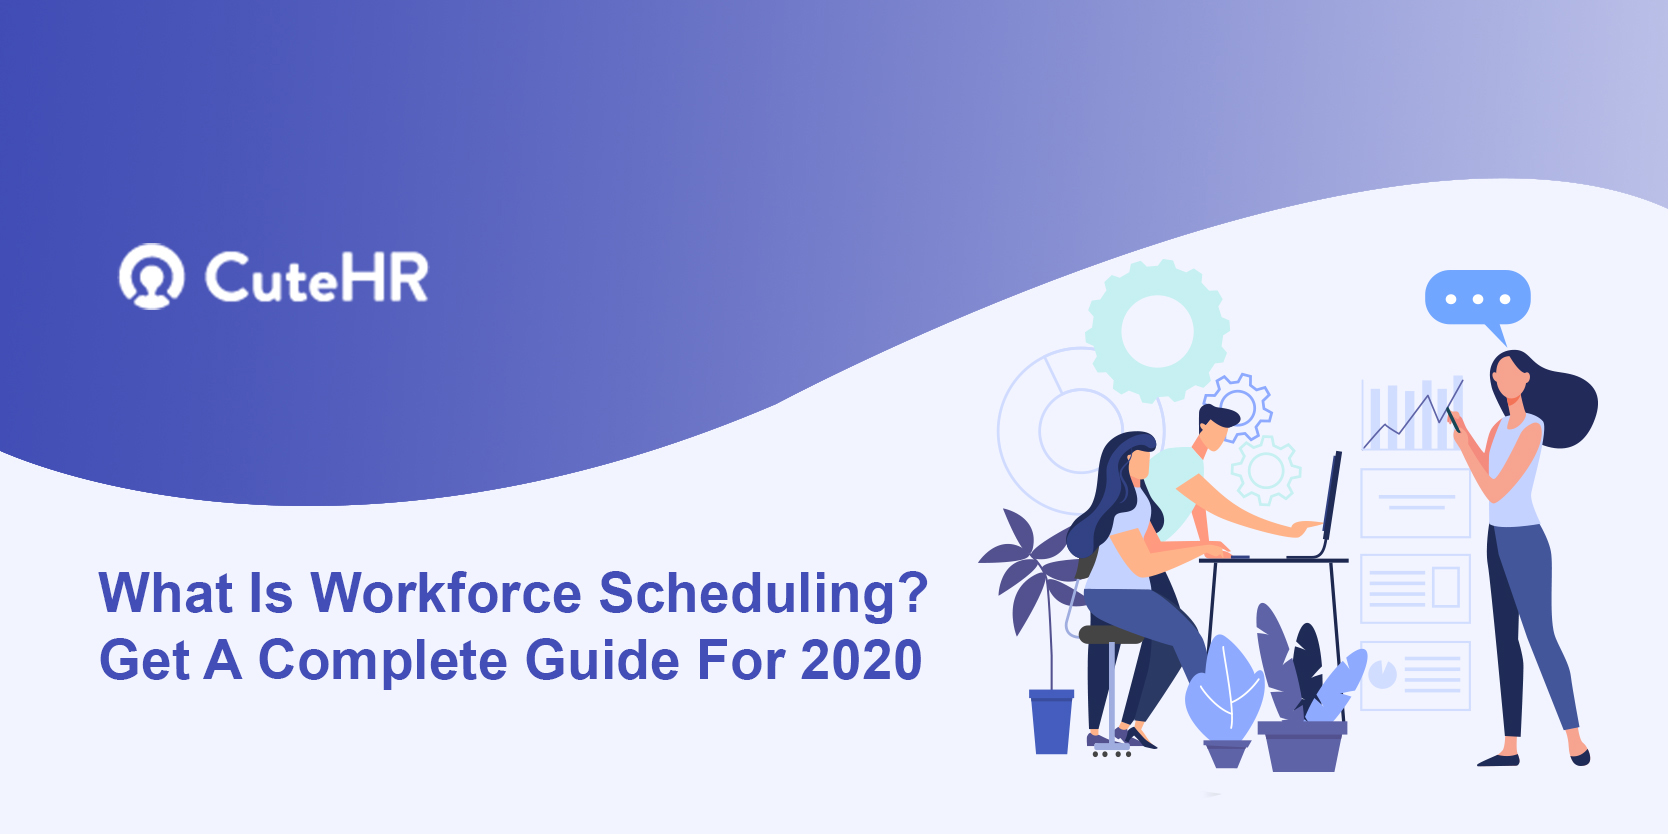 Workforce Scheduling. Get A Complete Guide